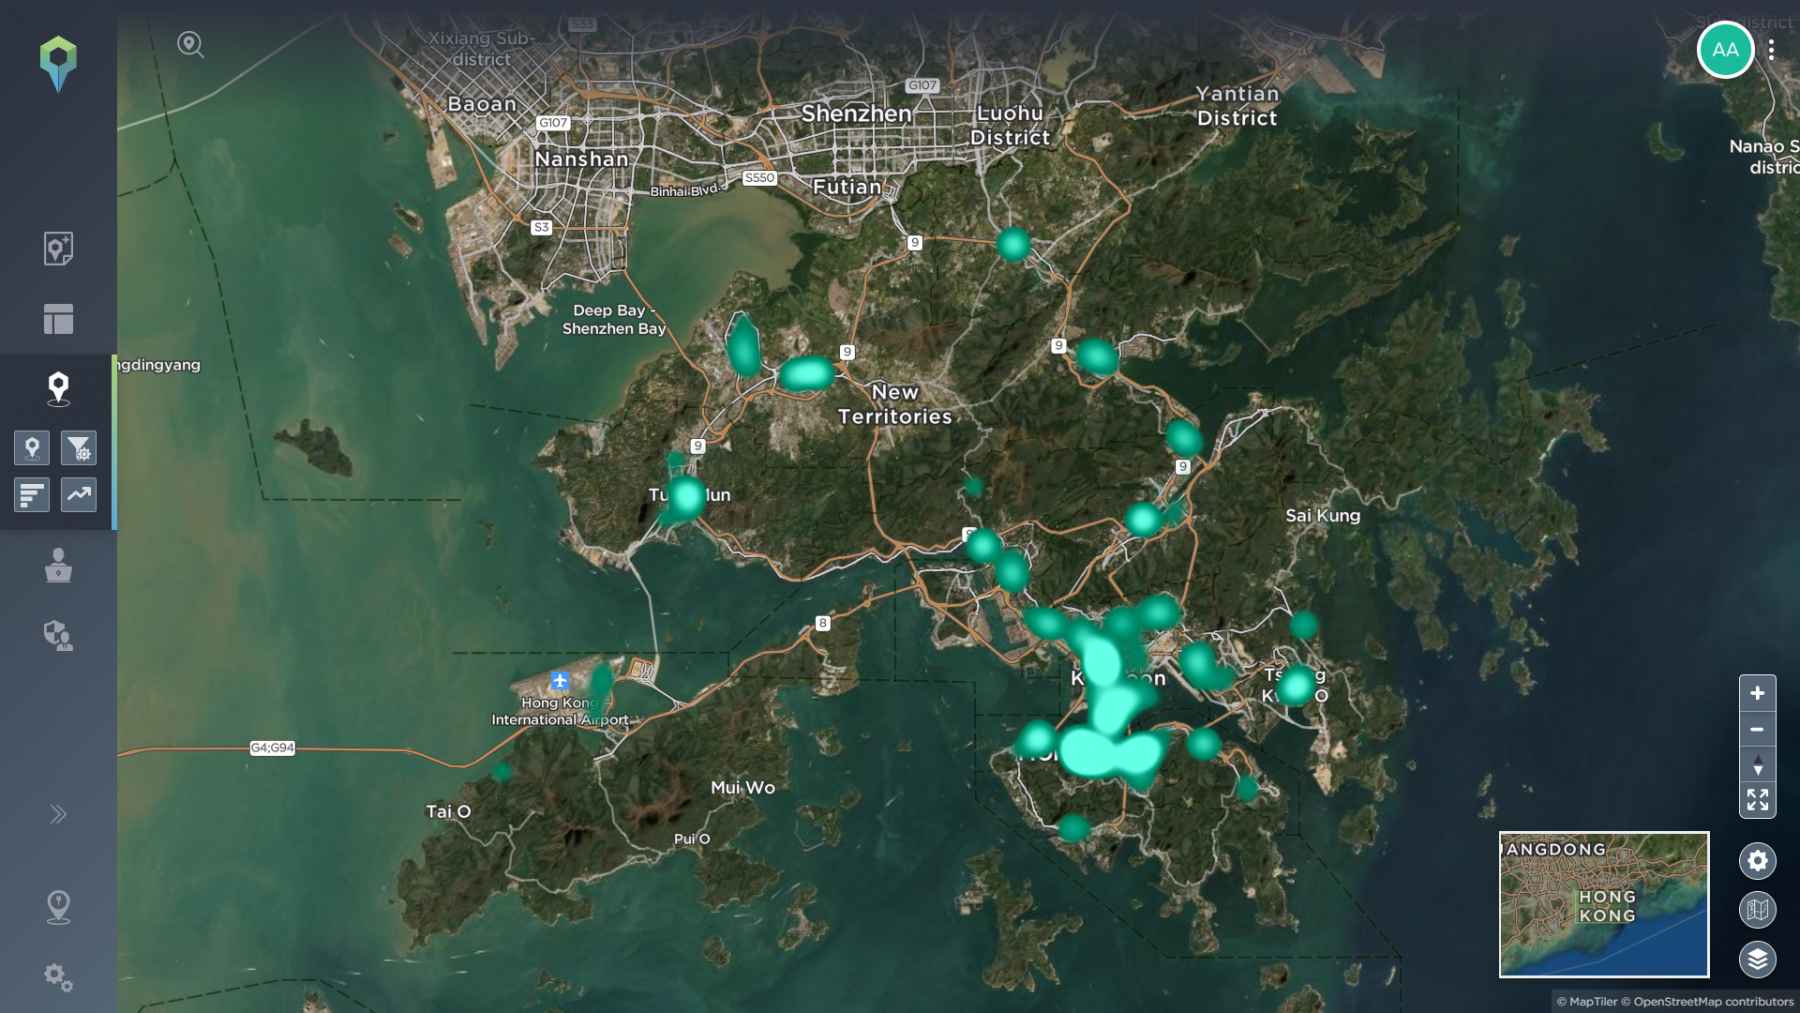 Heatmap showing Hong Kong’s protest activity from June 2019